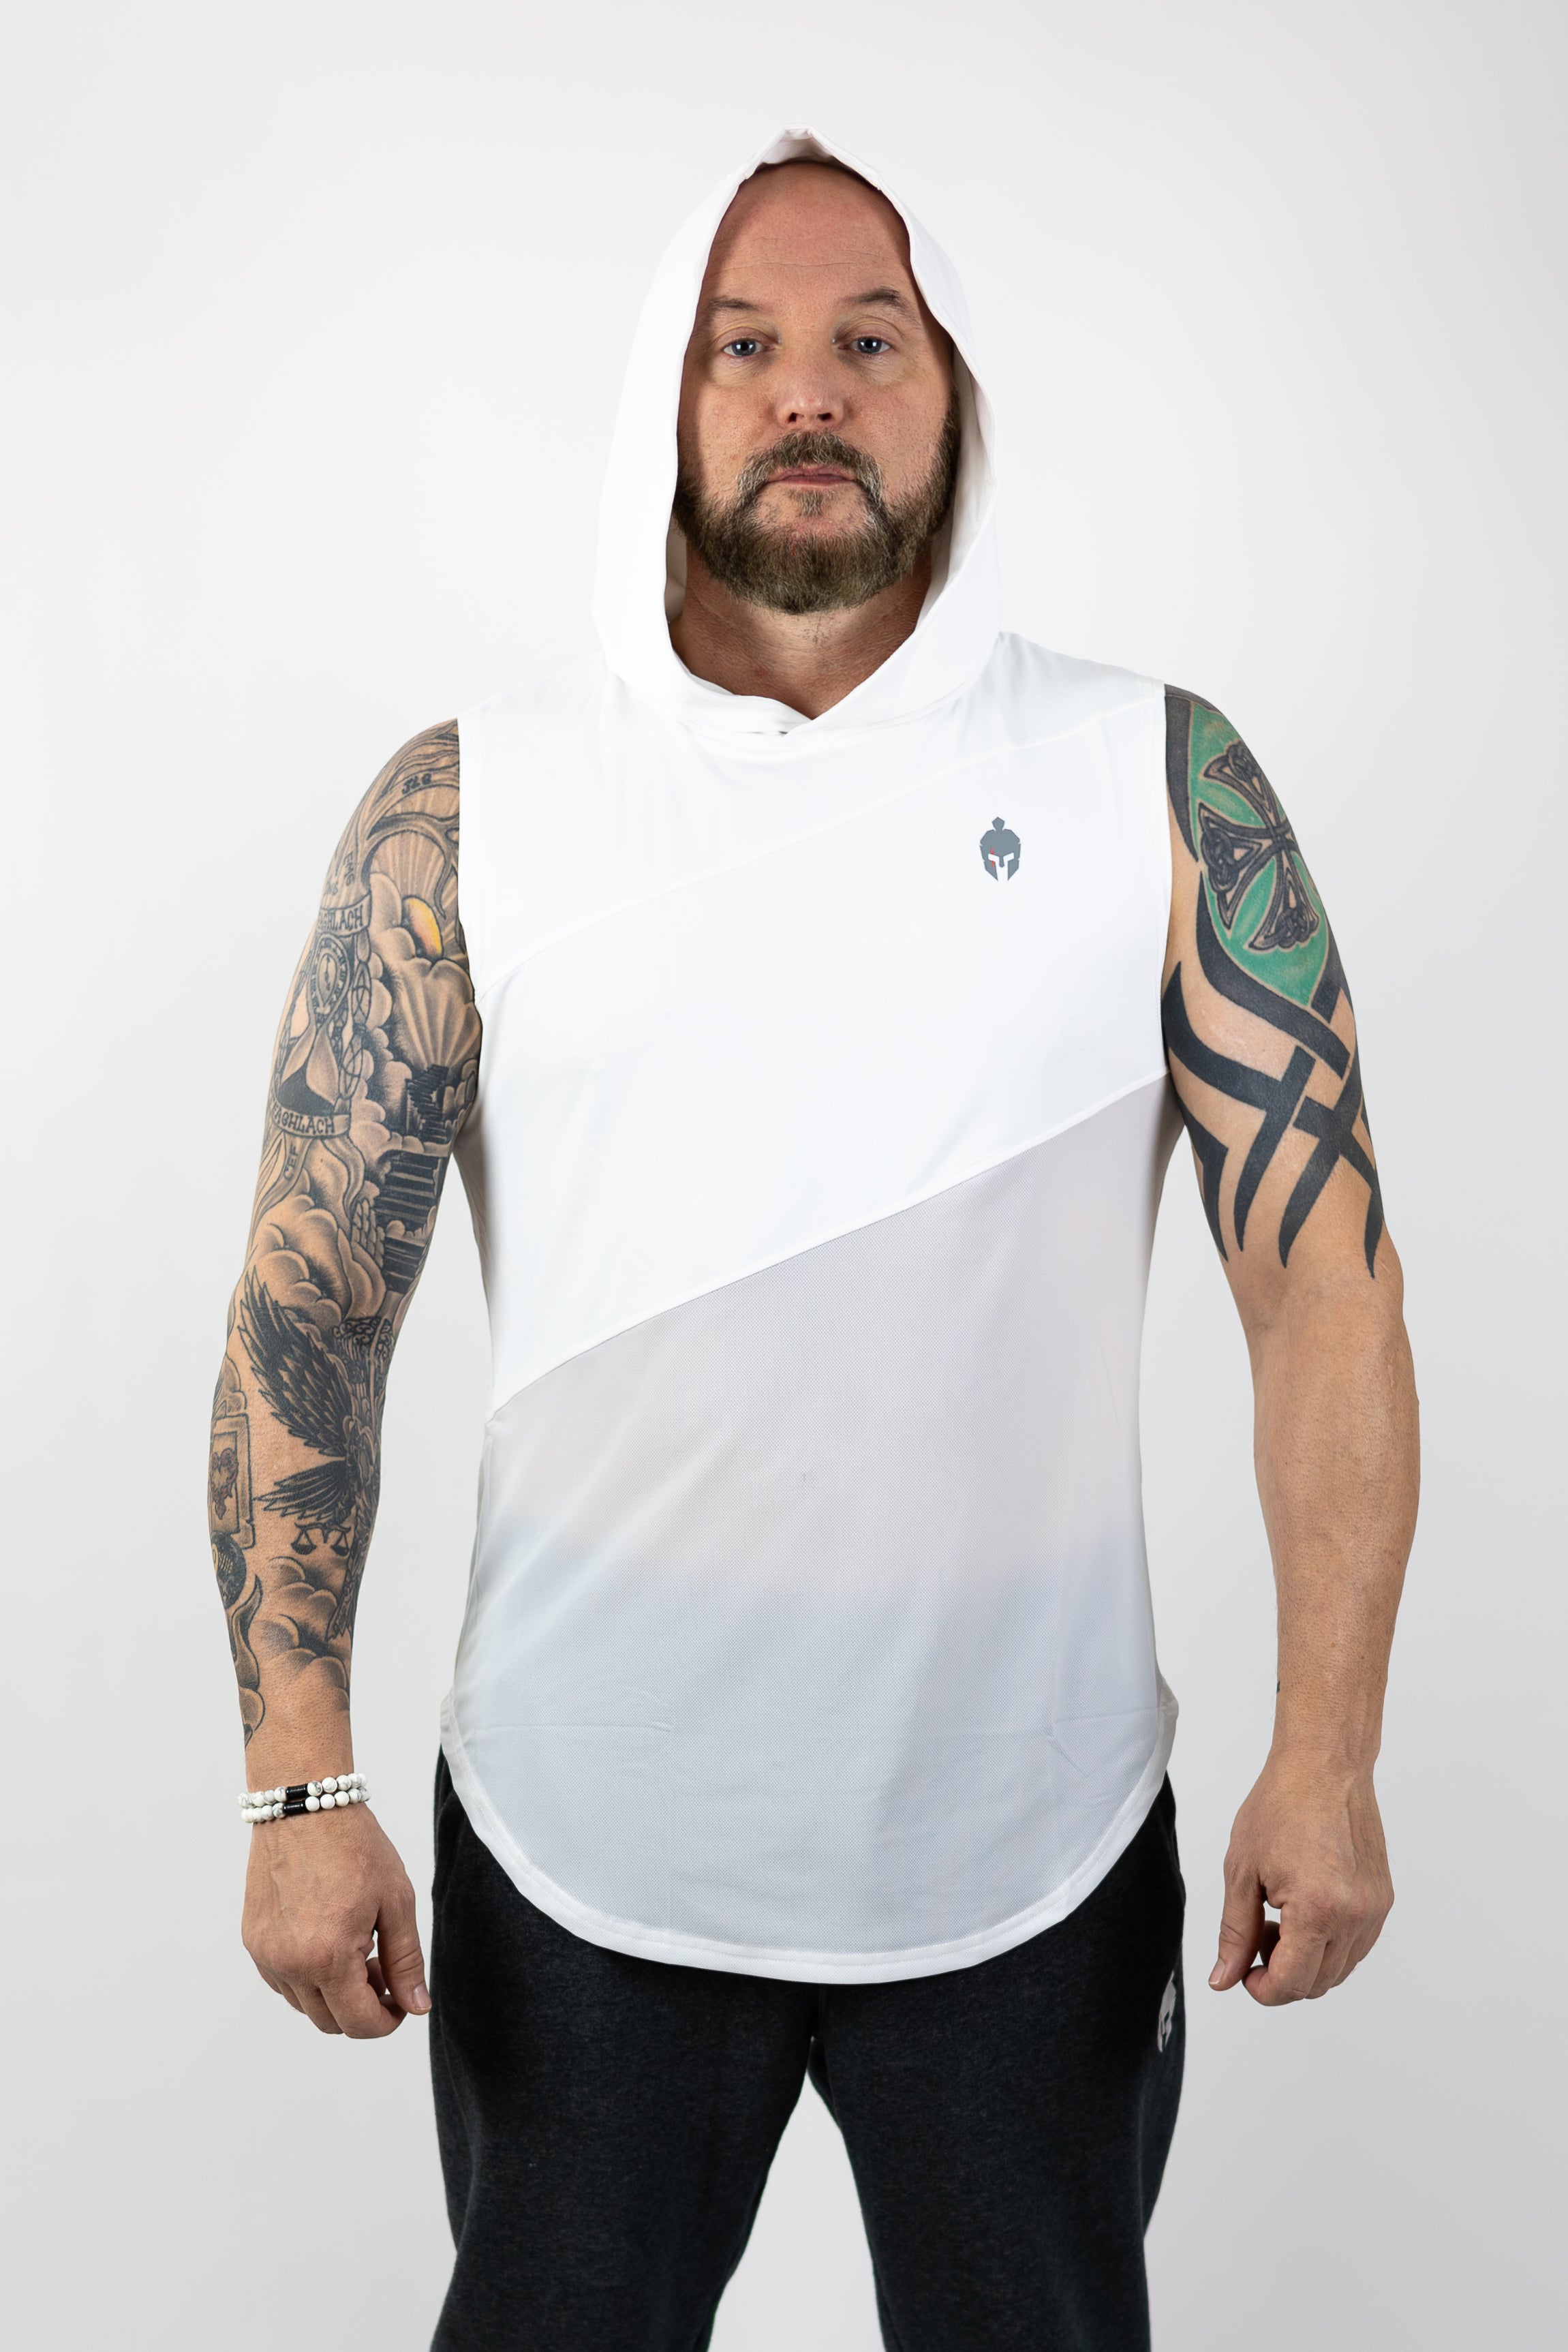 A man with tattoos on his arms stands confidently in a white Strength of One shirt with hood over head and gray sweatpants